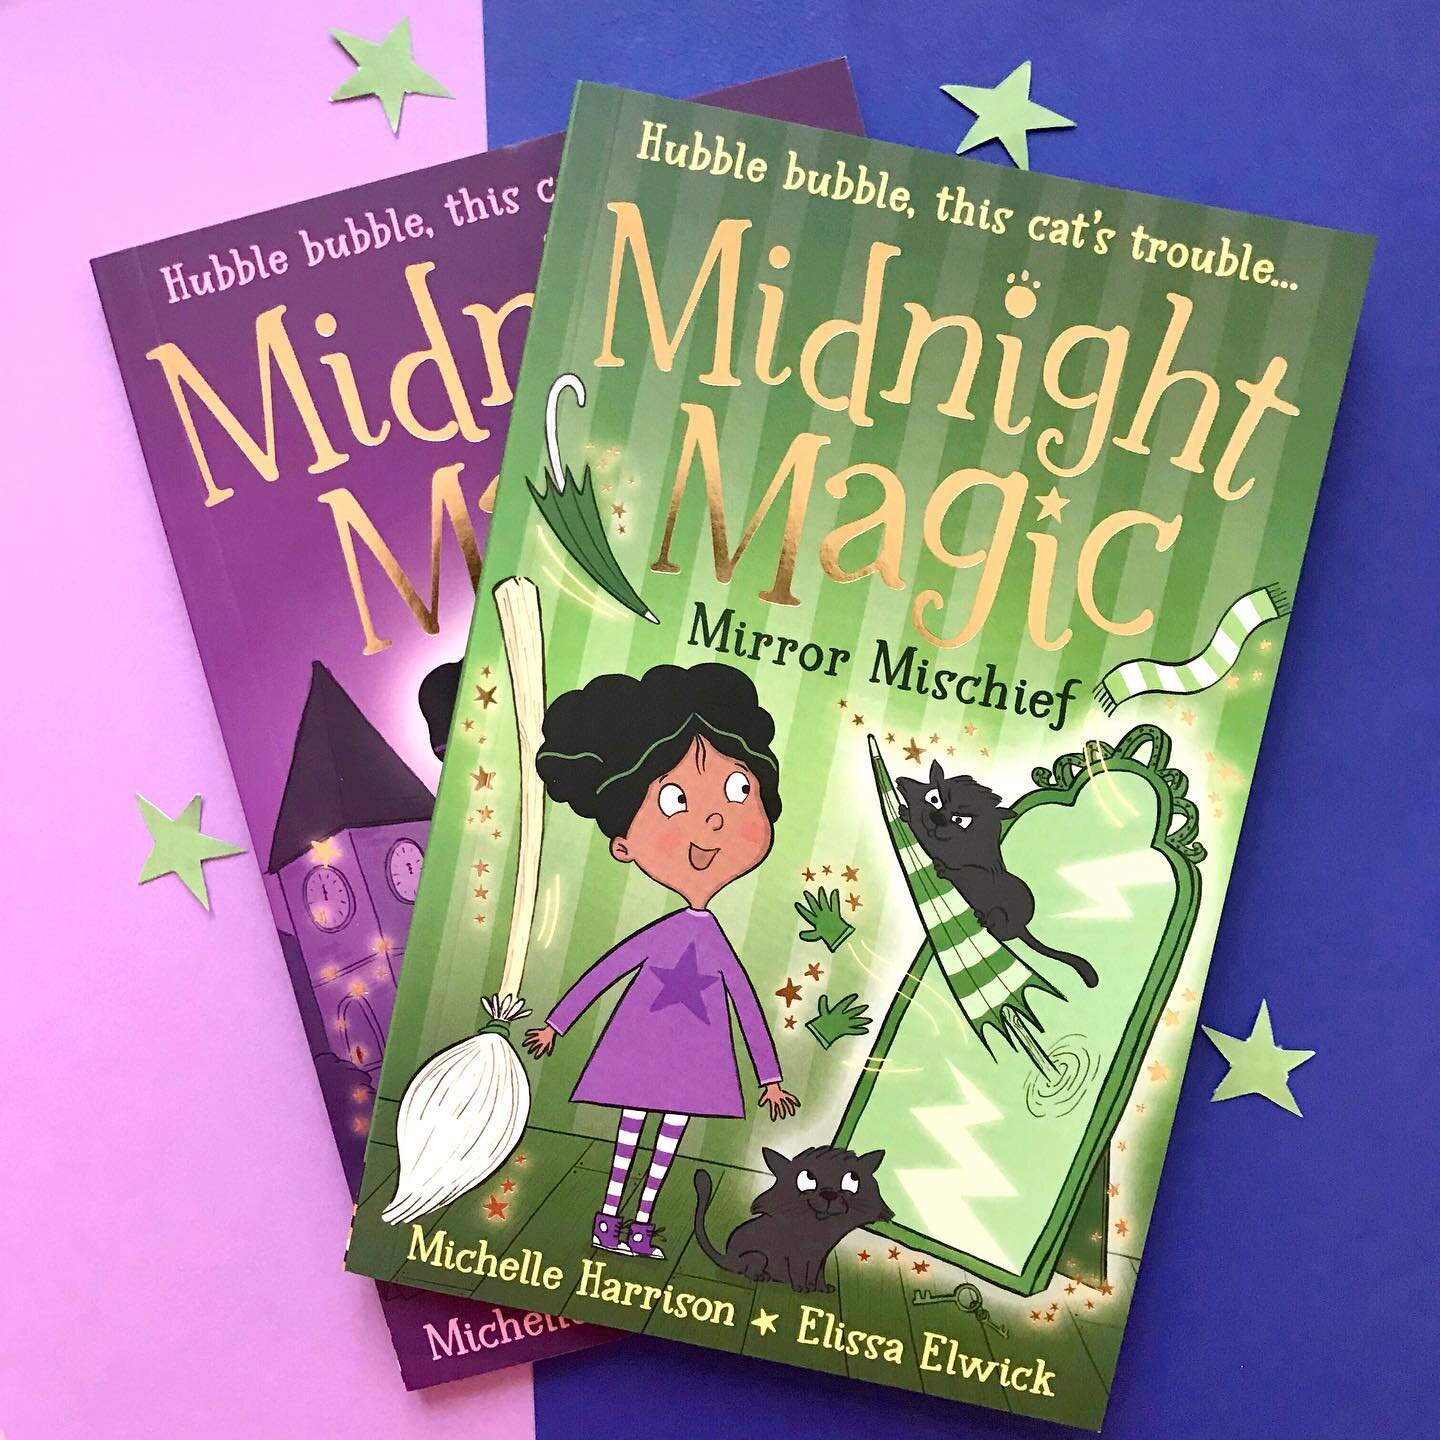 ⭐️Midnight Magic: Mirror Mischief is out today!
The second book in this magical, fun series written by @elvesden and sooo much fun to illustrate! (I don&rsquo;t tire of drawing cats!) 🐈&zwj;⬛ 💫

Published by @littletigerbooks 
and designed by @soph